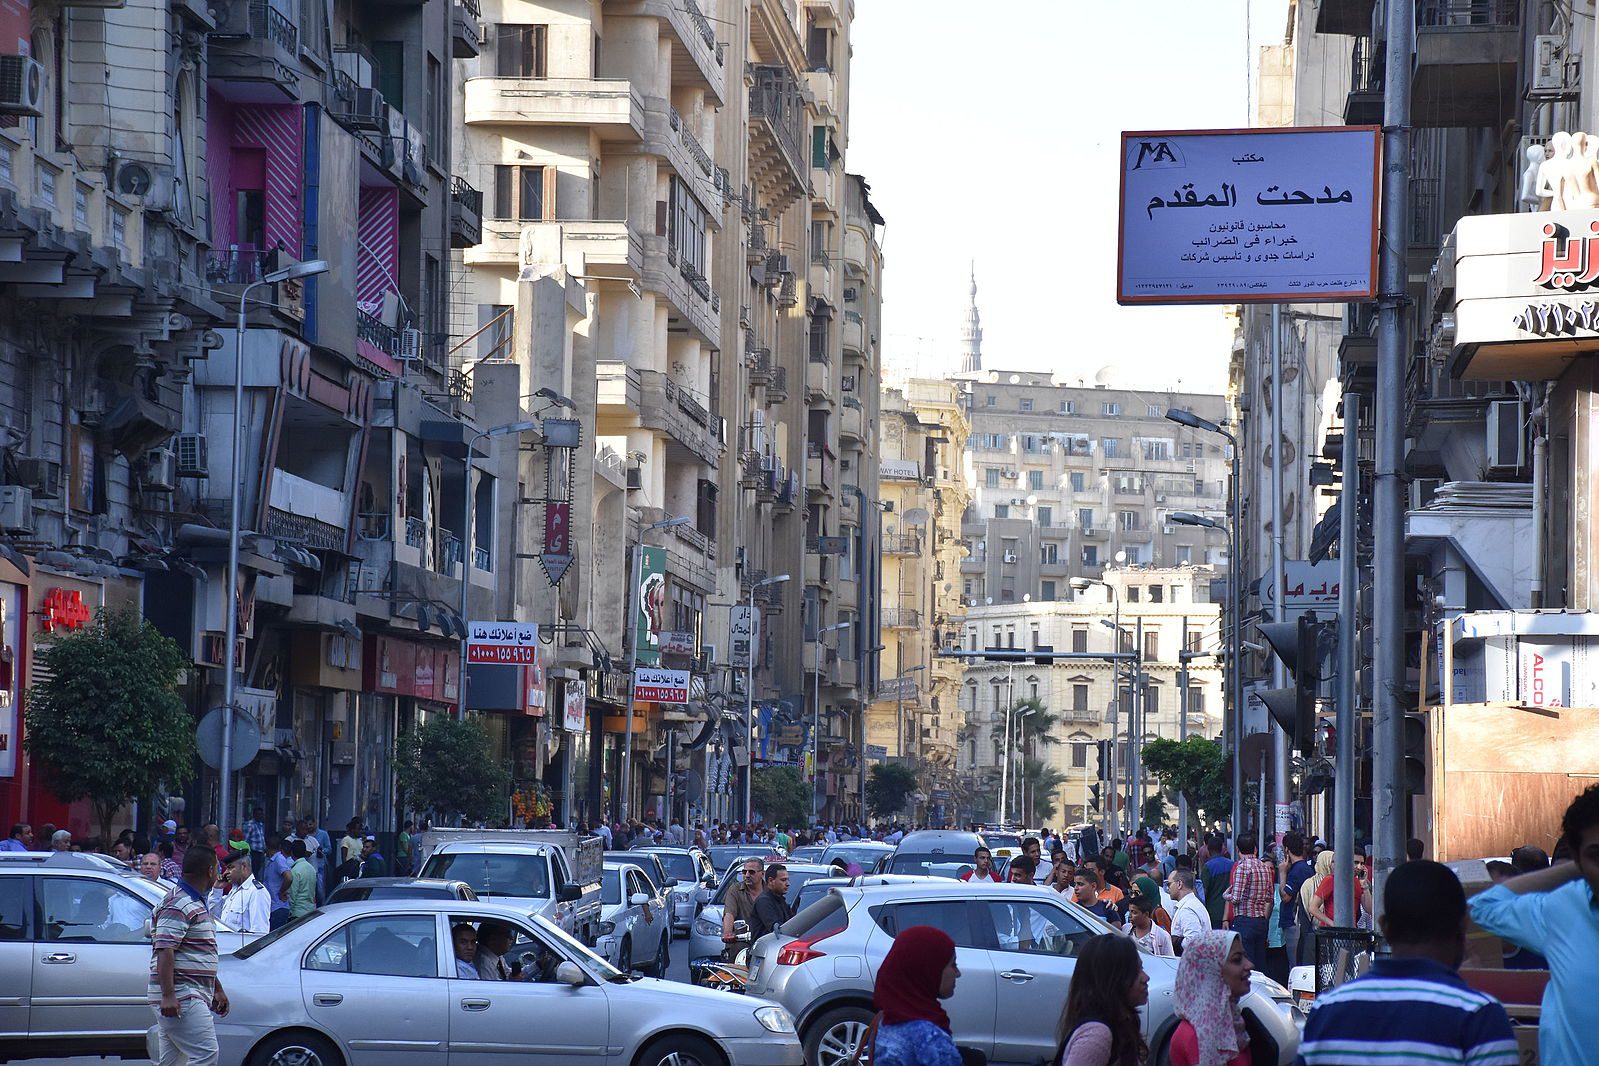 busy_talaat_harb_street_in_cairo_near_tahrir_square